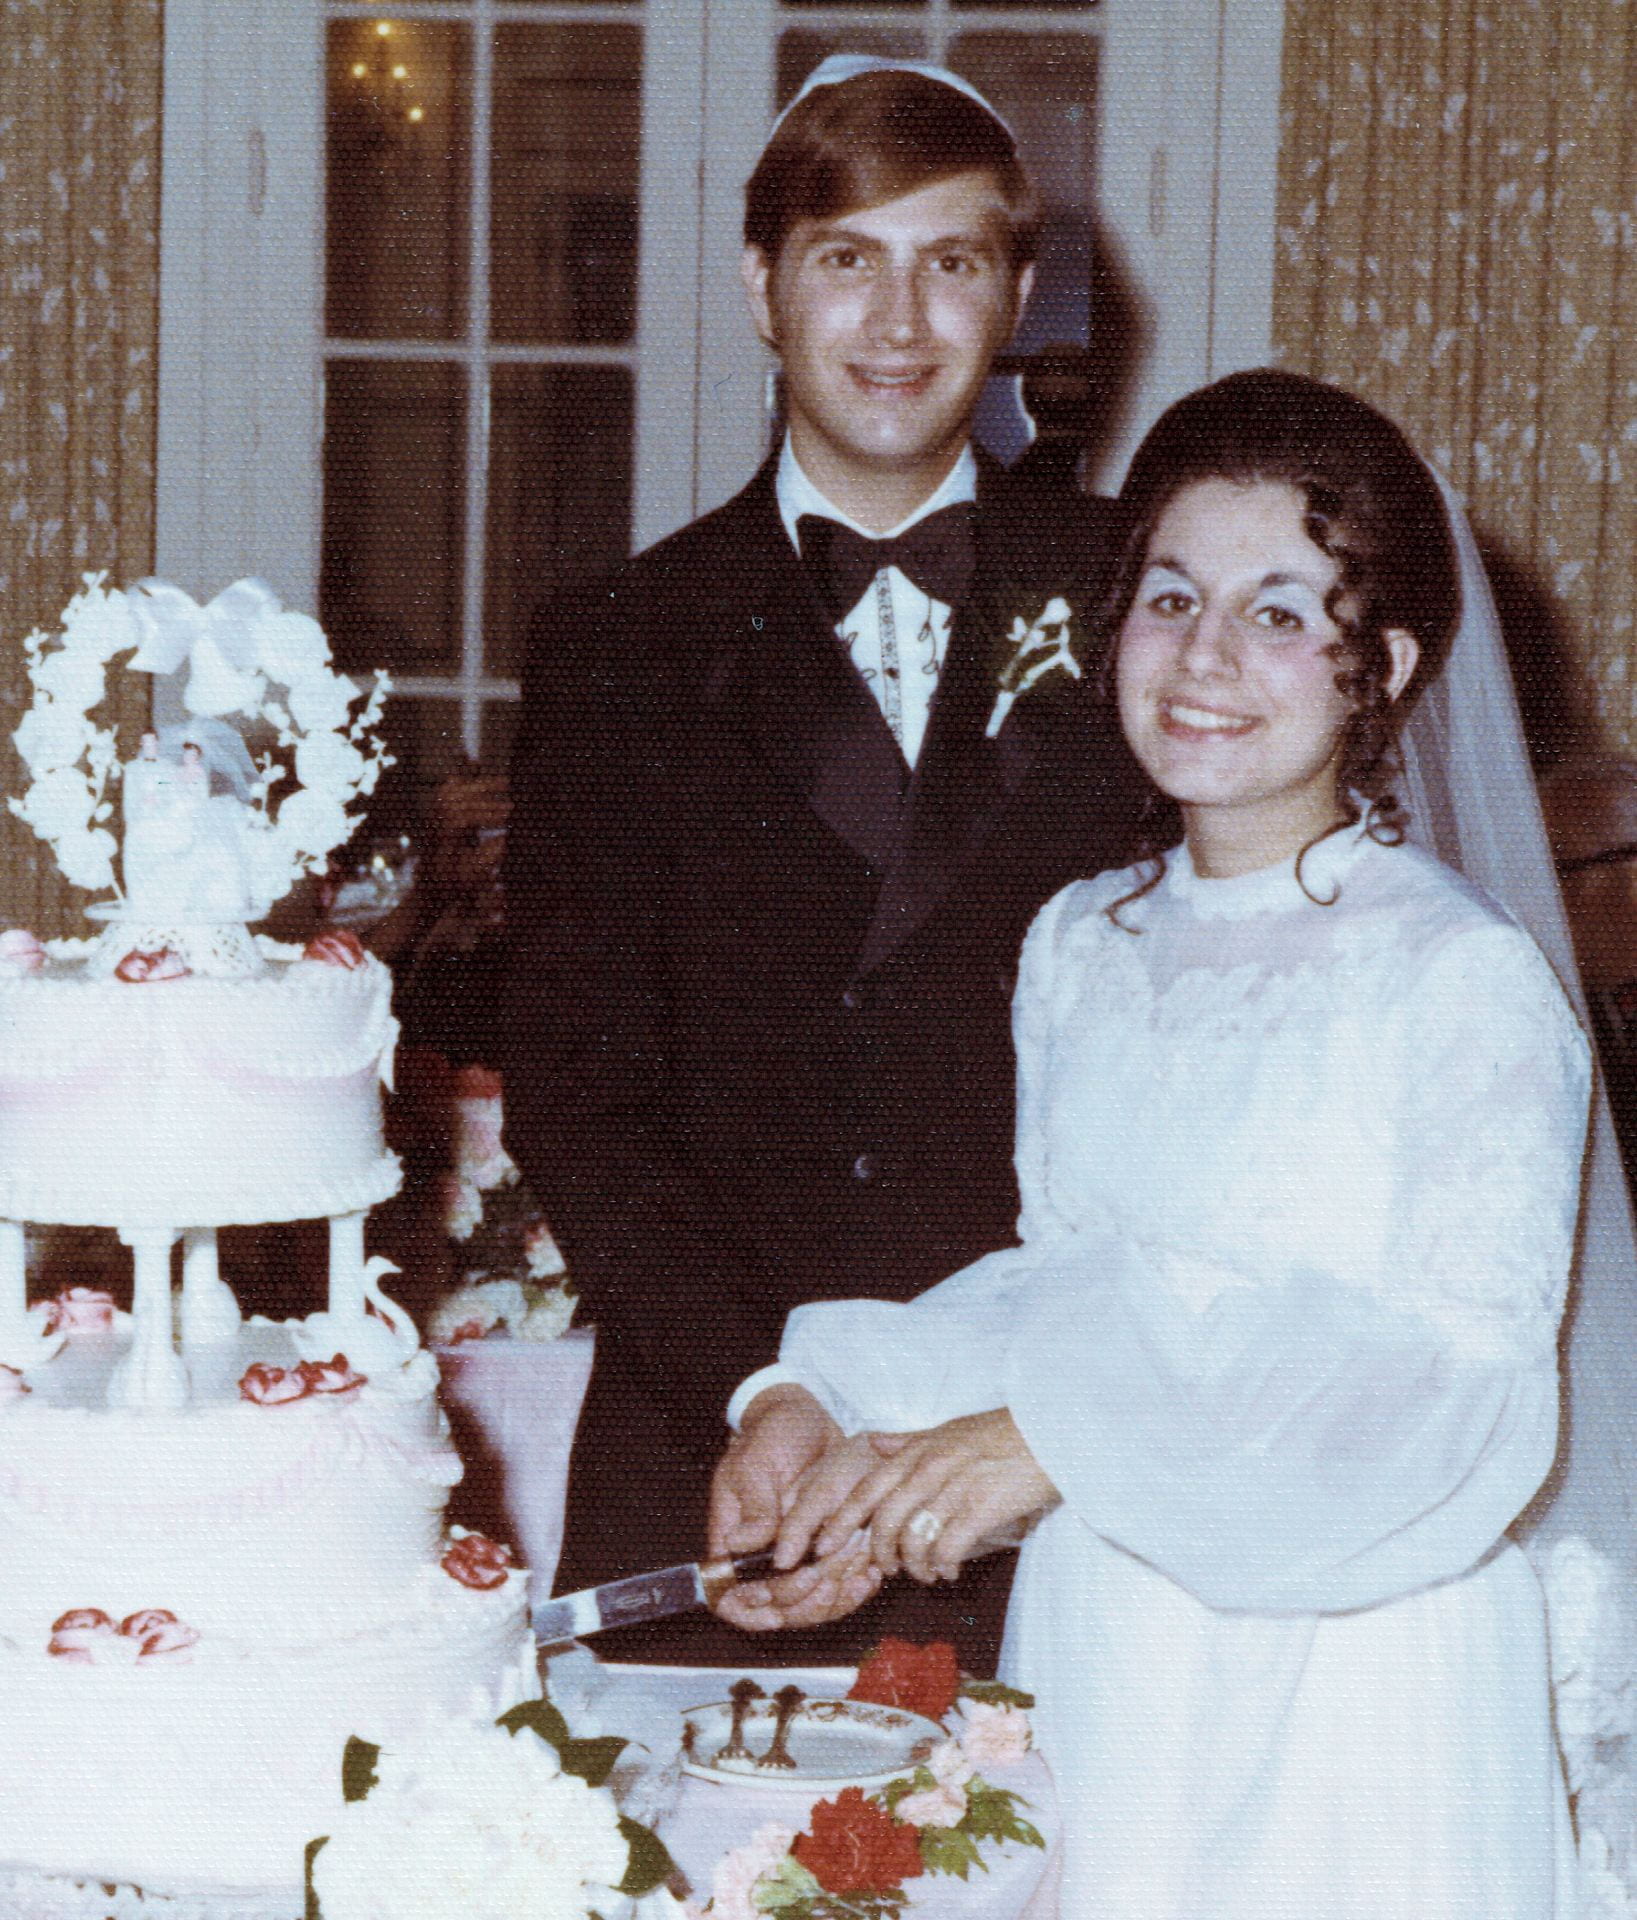 Judee-and-Sherwin-Levinson-married-on-August-8-1971-while-she-was-a-student-at-Roosevelt